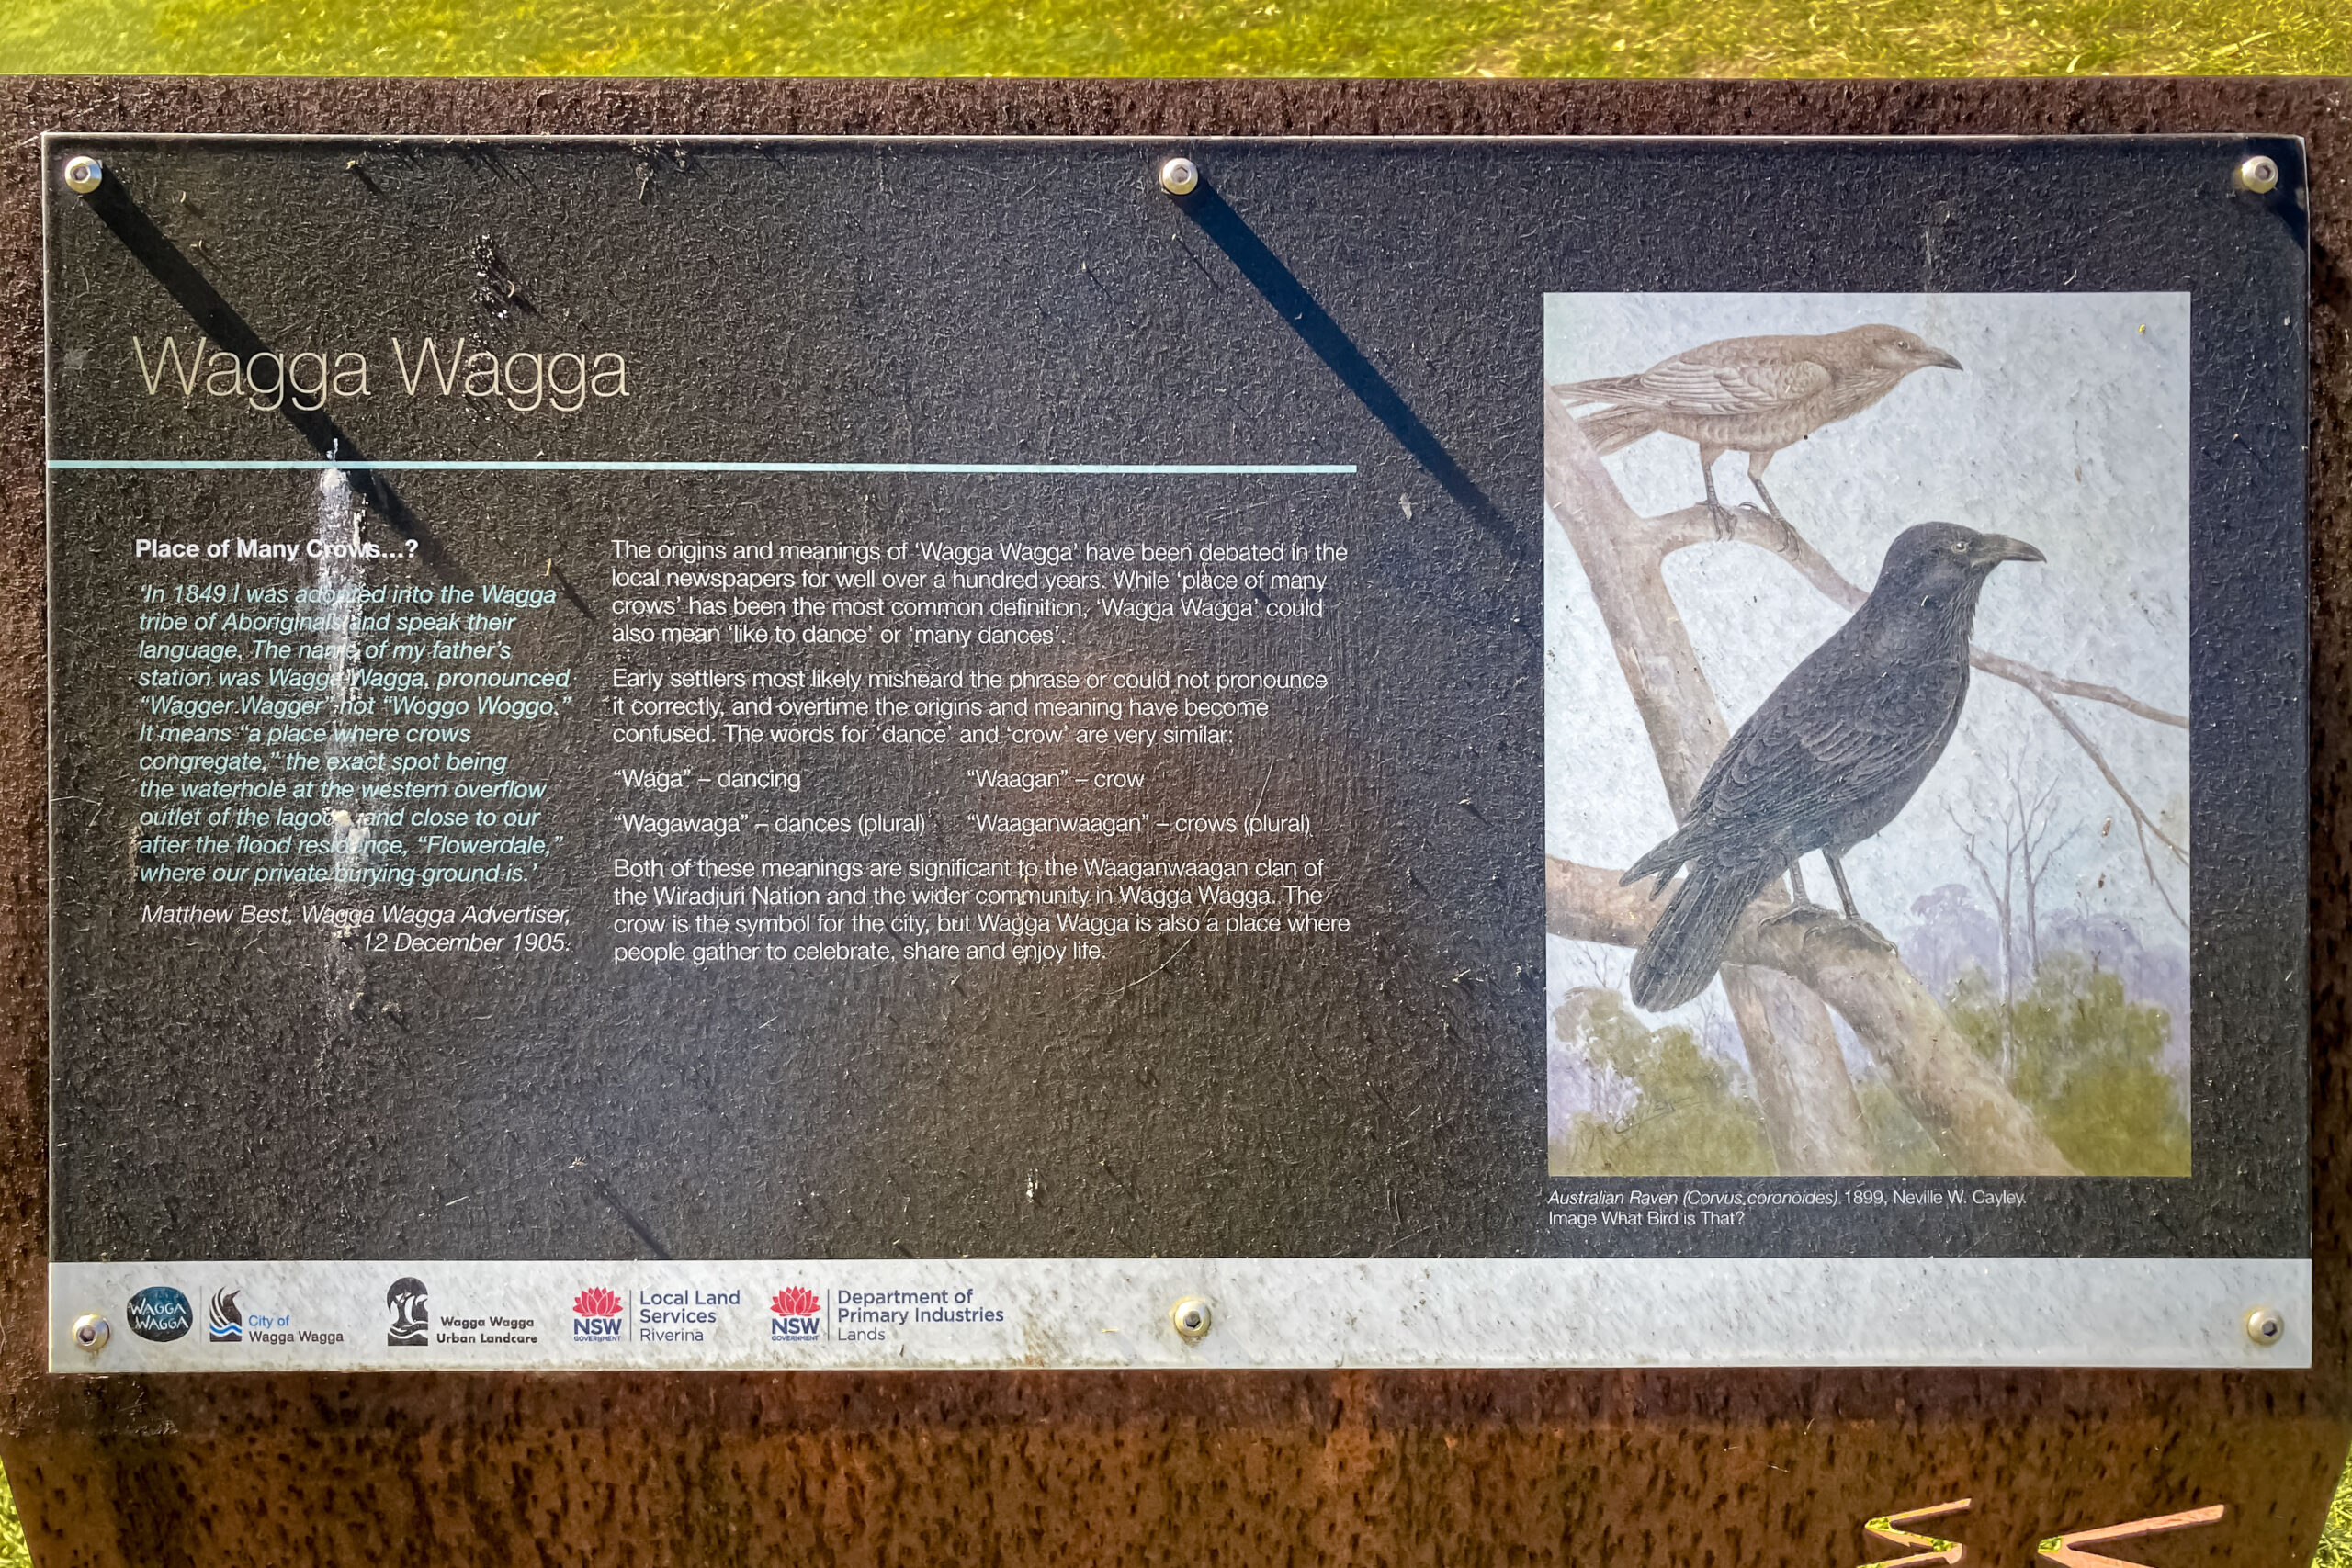 In information sign with a picture of a crow that says the origin of the name Wagga Wagga is from the Wiradjuri language and may be from the word for 'crow' or the word for 'dance'